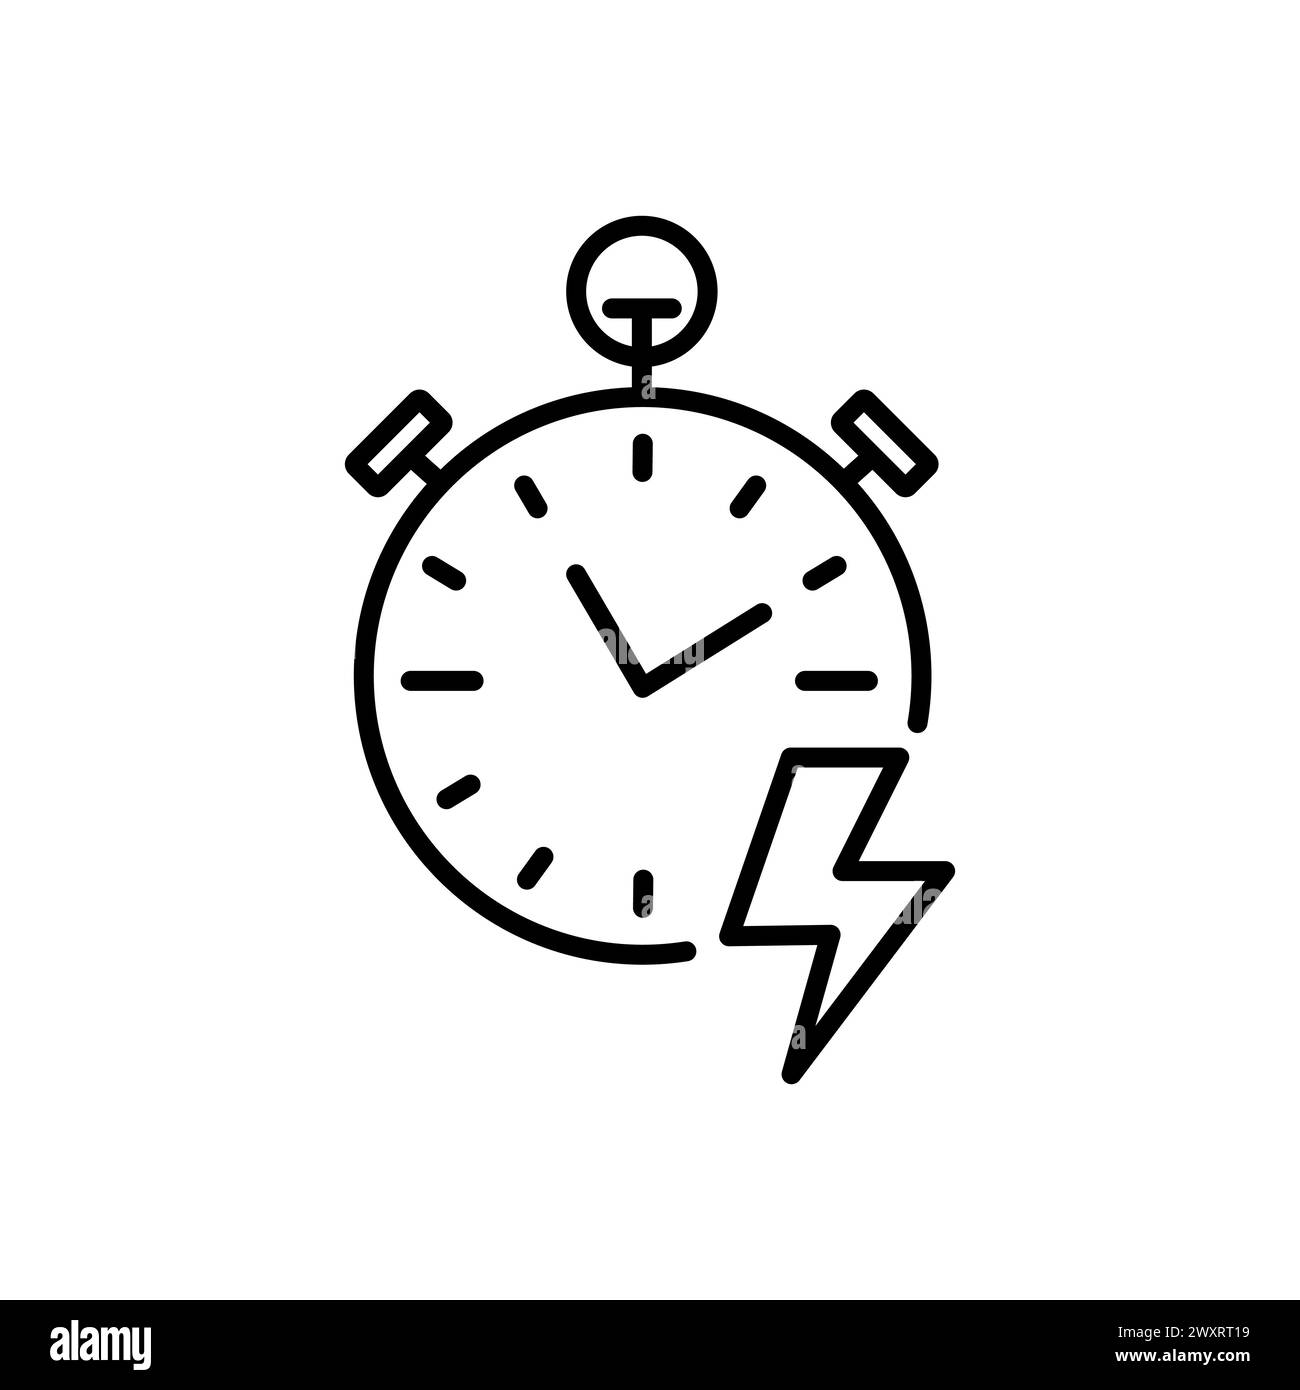 Stopwatch, clock icon. Timer icon isolated on white background. Stopwatch logo design with thunderbolt. Stock Vector